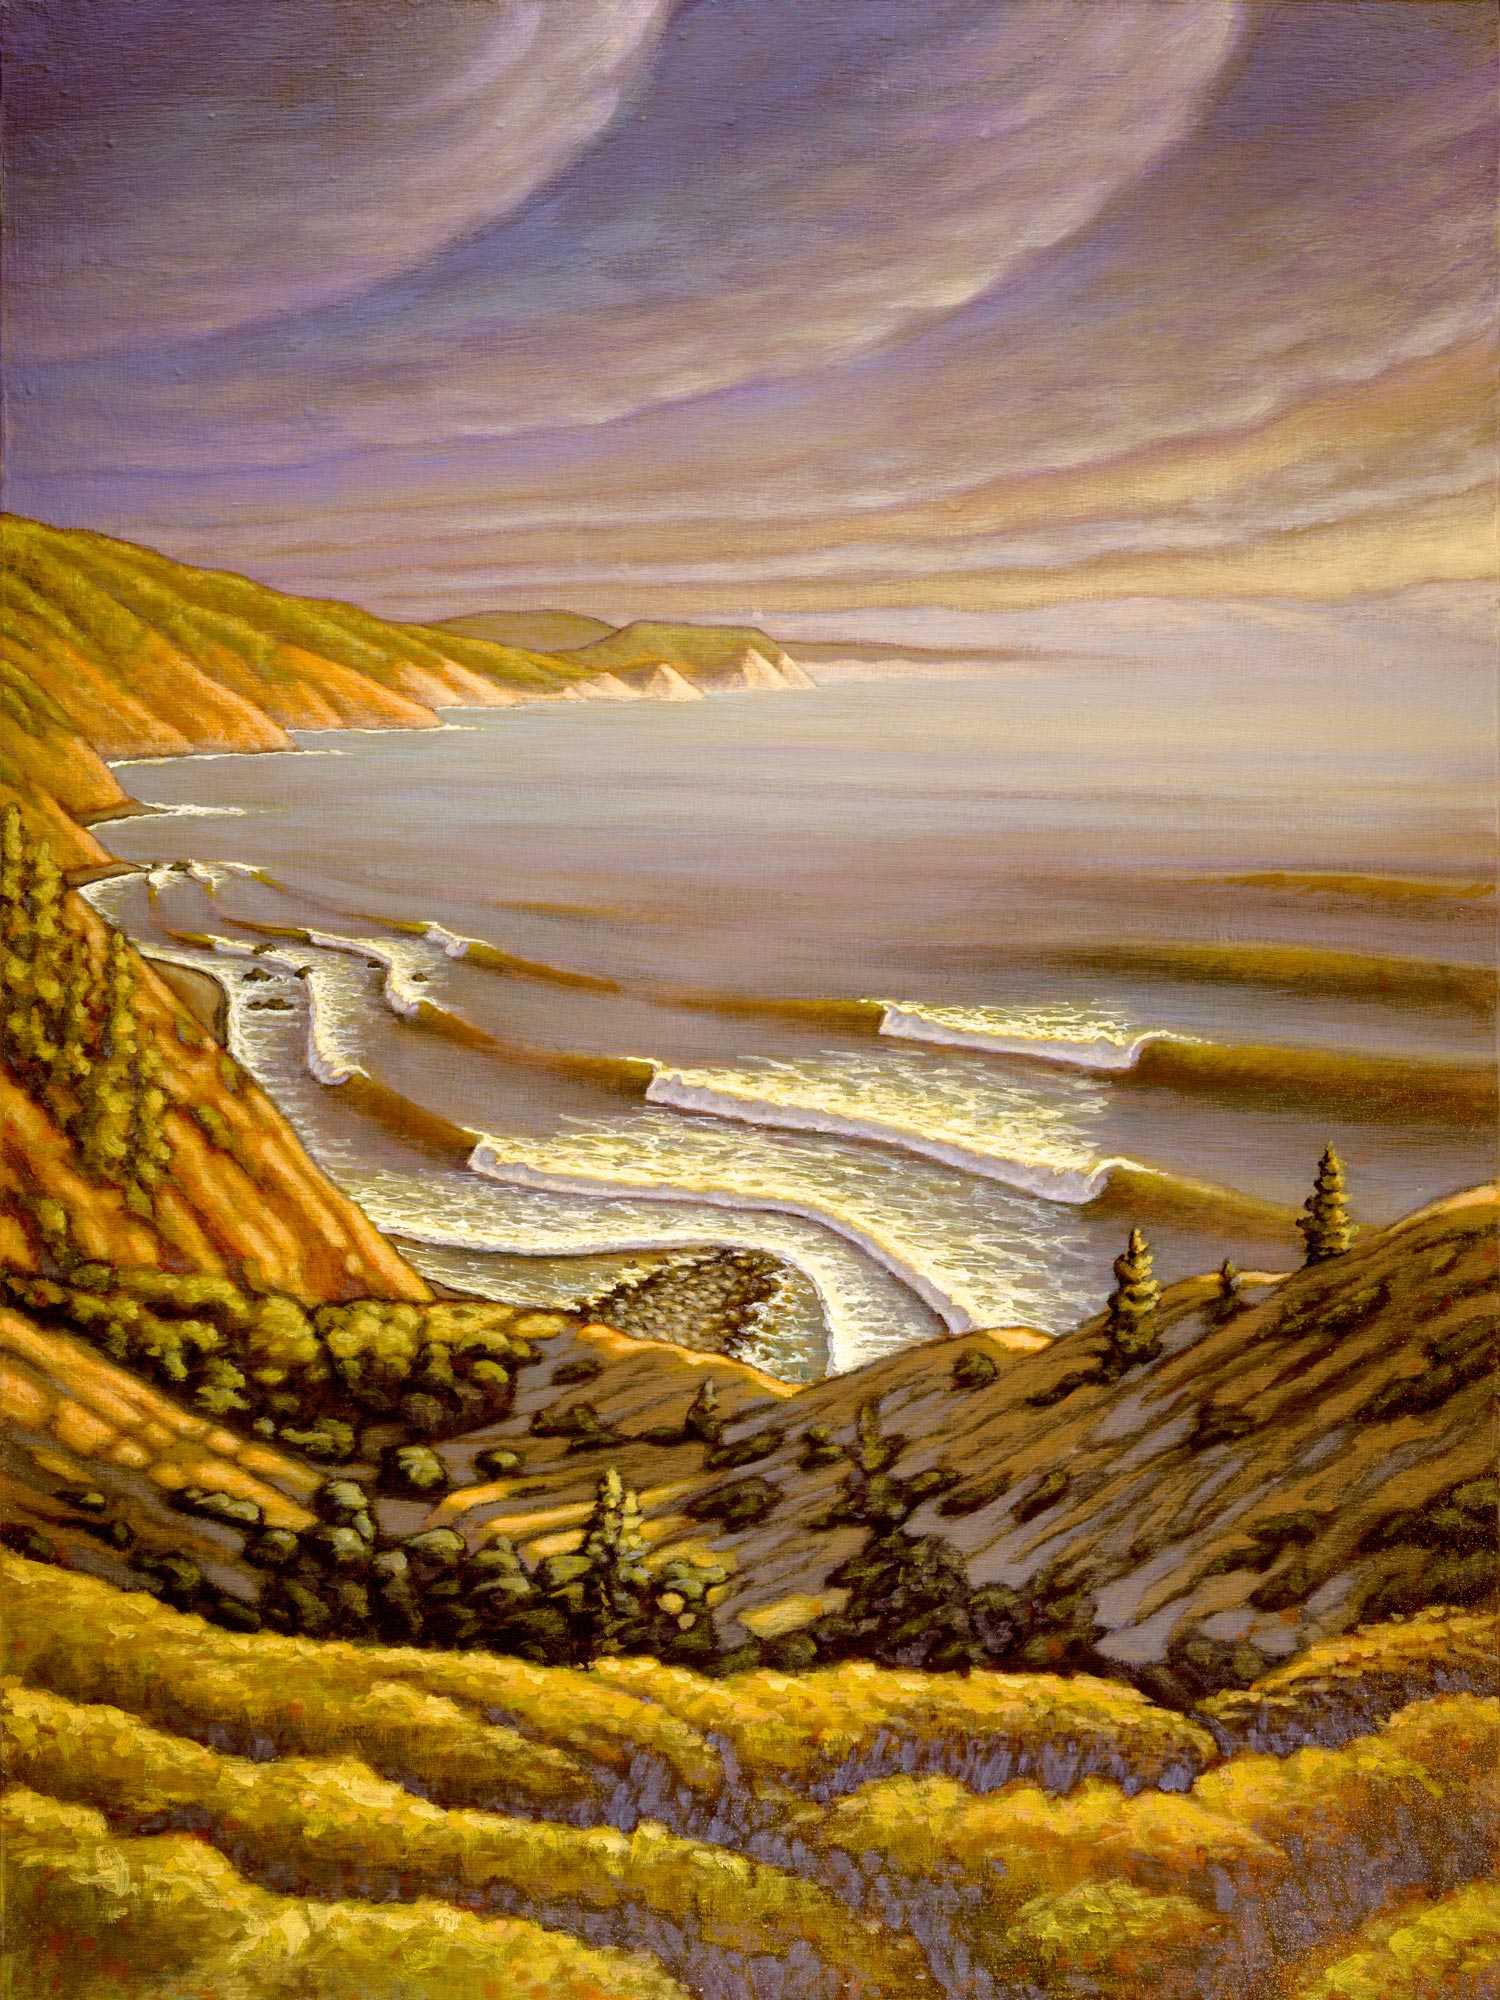 A landscape painting of the Lost Coast near Shelter Cove on the Humboldt county coast of northern California